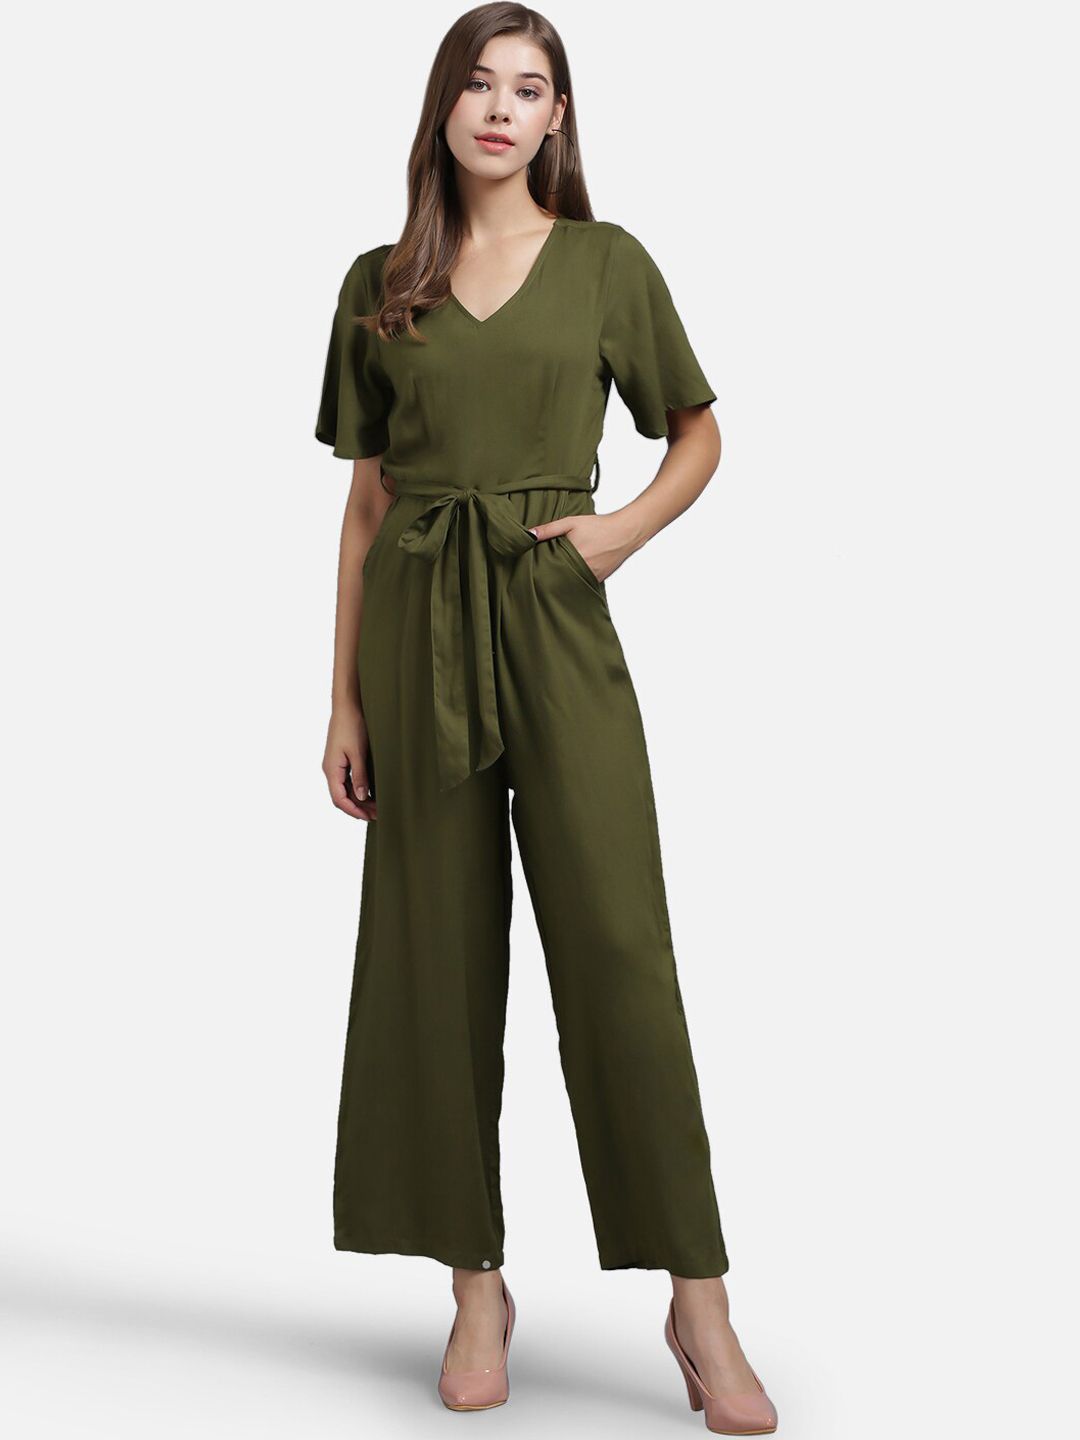 The Dry State Women Olive Green Solid Basic Jumpsuit Price in India